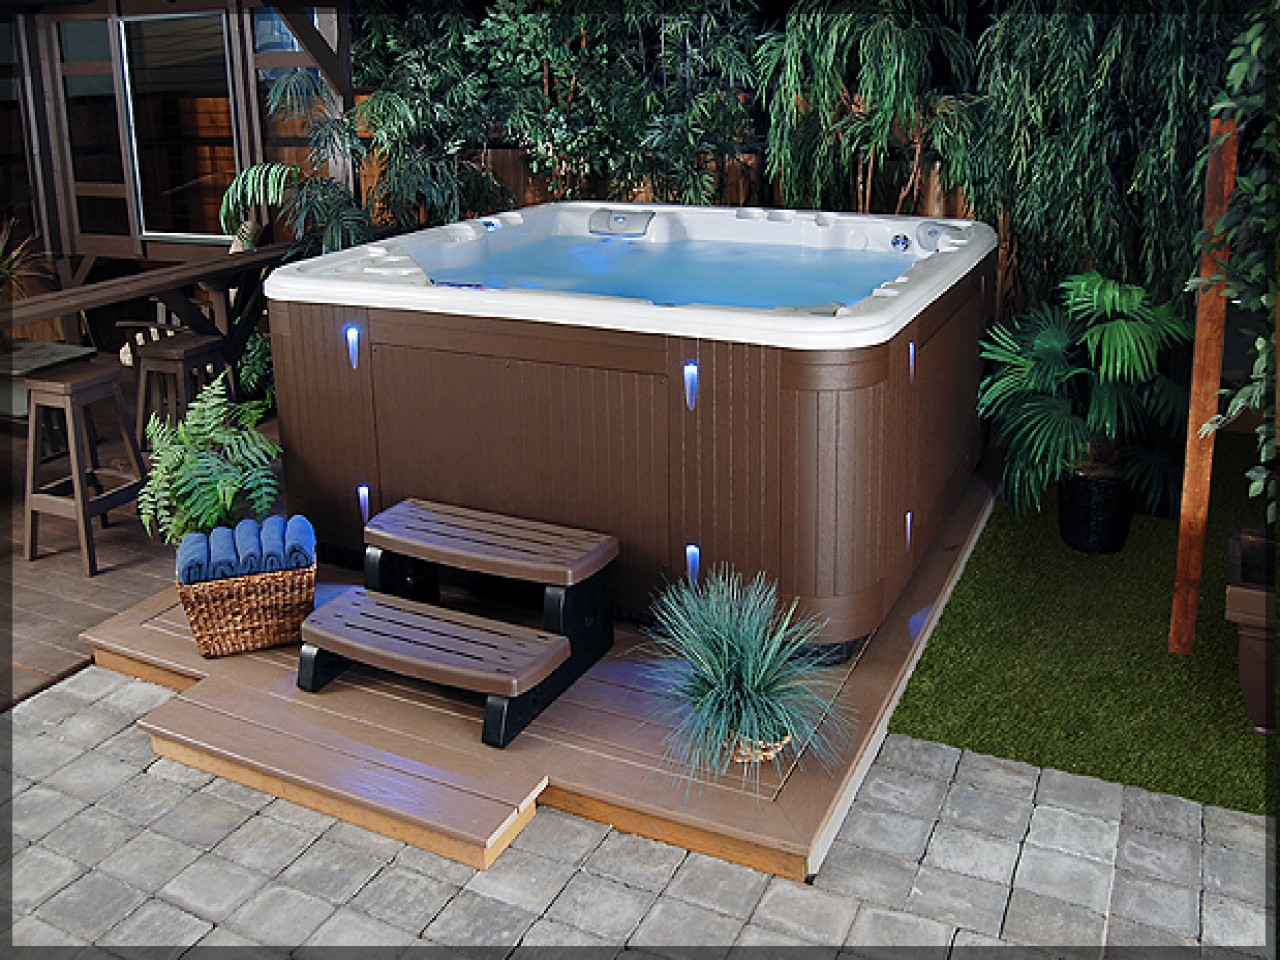 Outdoor Hot Tub Landscaping Ideas
 Patio Backyard Jacuzzi Landscaping Ideas Hot Tub With